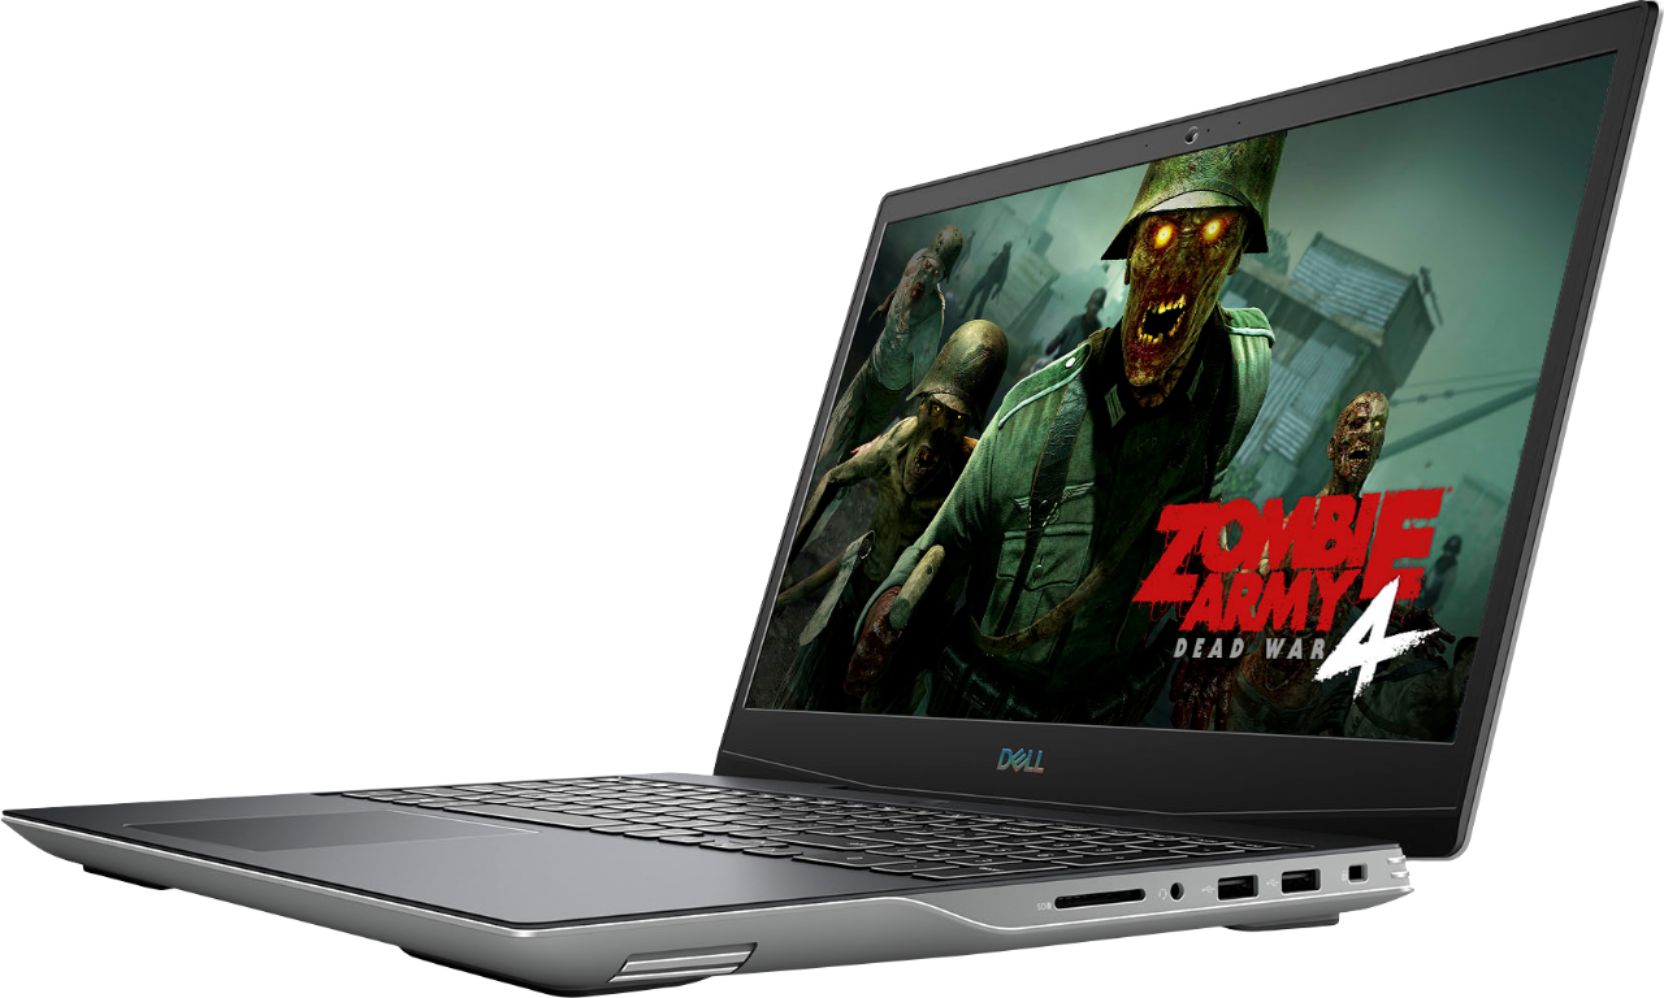 Dell G5 15.6" Gaming Laptop 144Hz AMD Ryzen 7 8GB Memory AMD Radeon RX 5600M 512GB Solid State Drive grey i5505-A753GRY-PUS - Best Buy